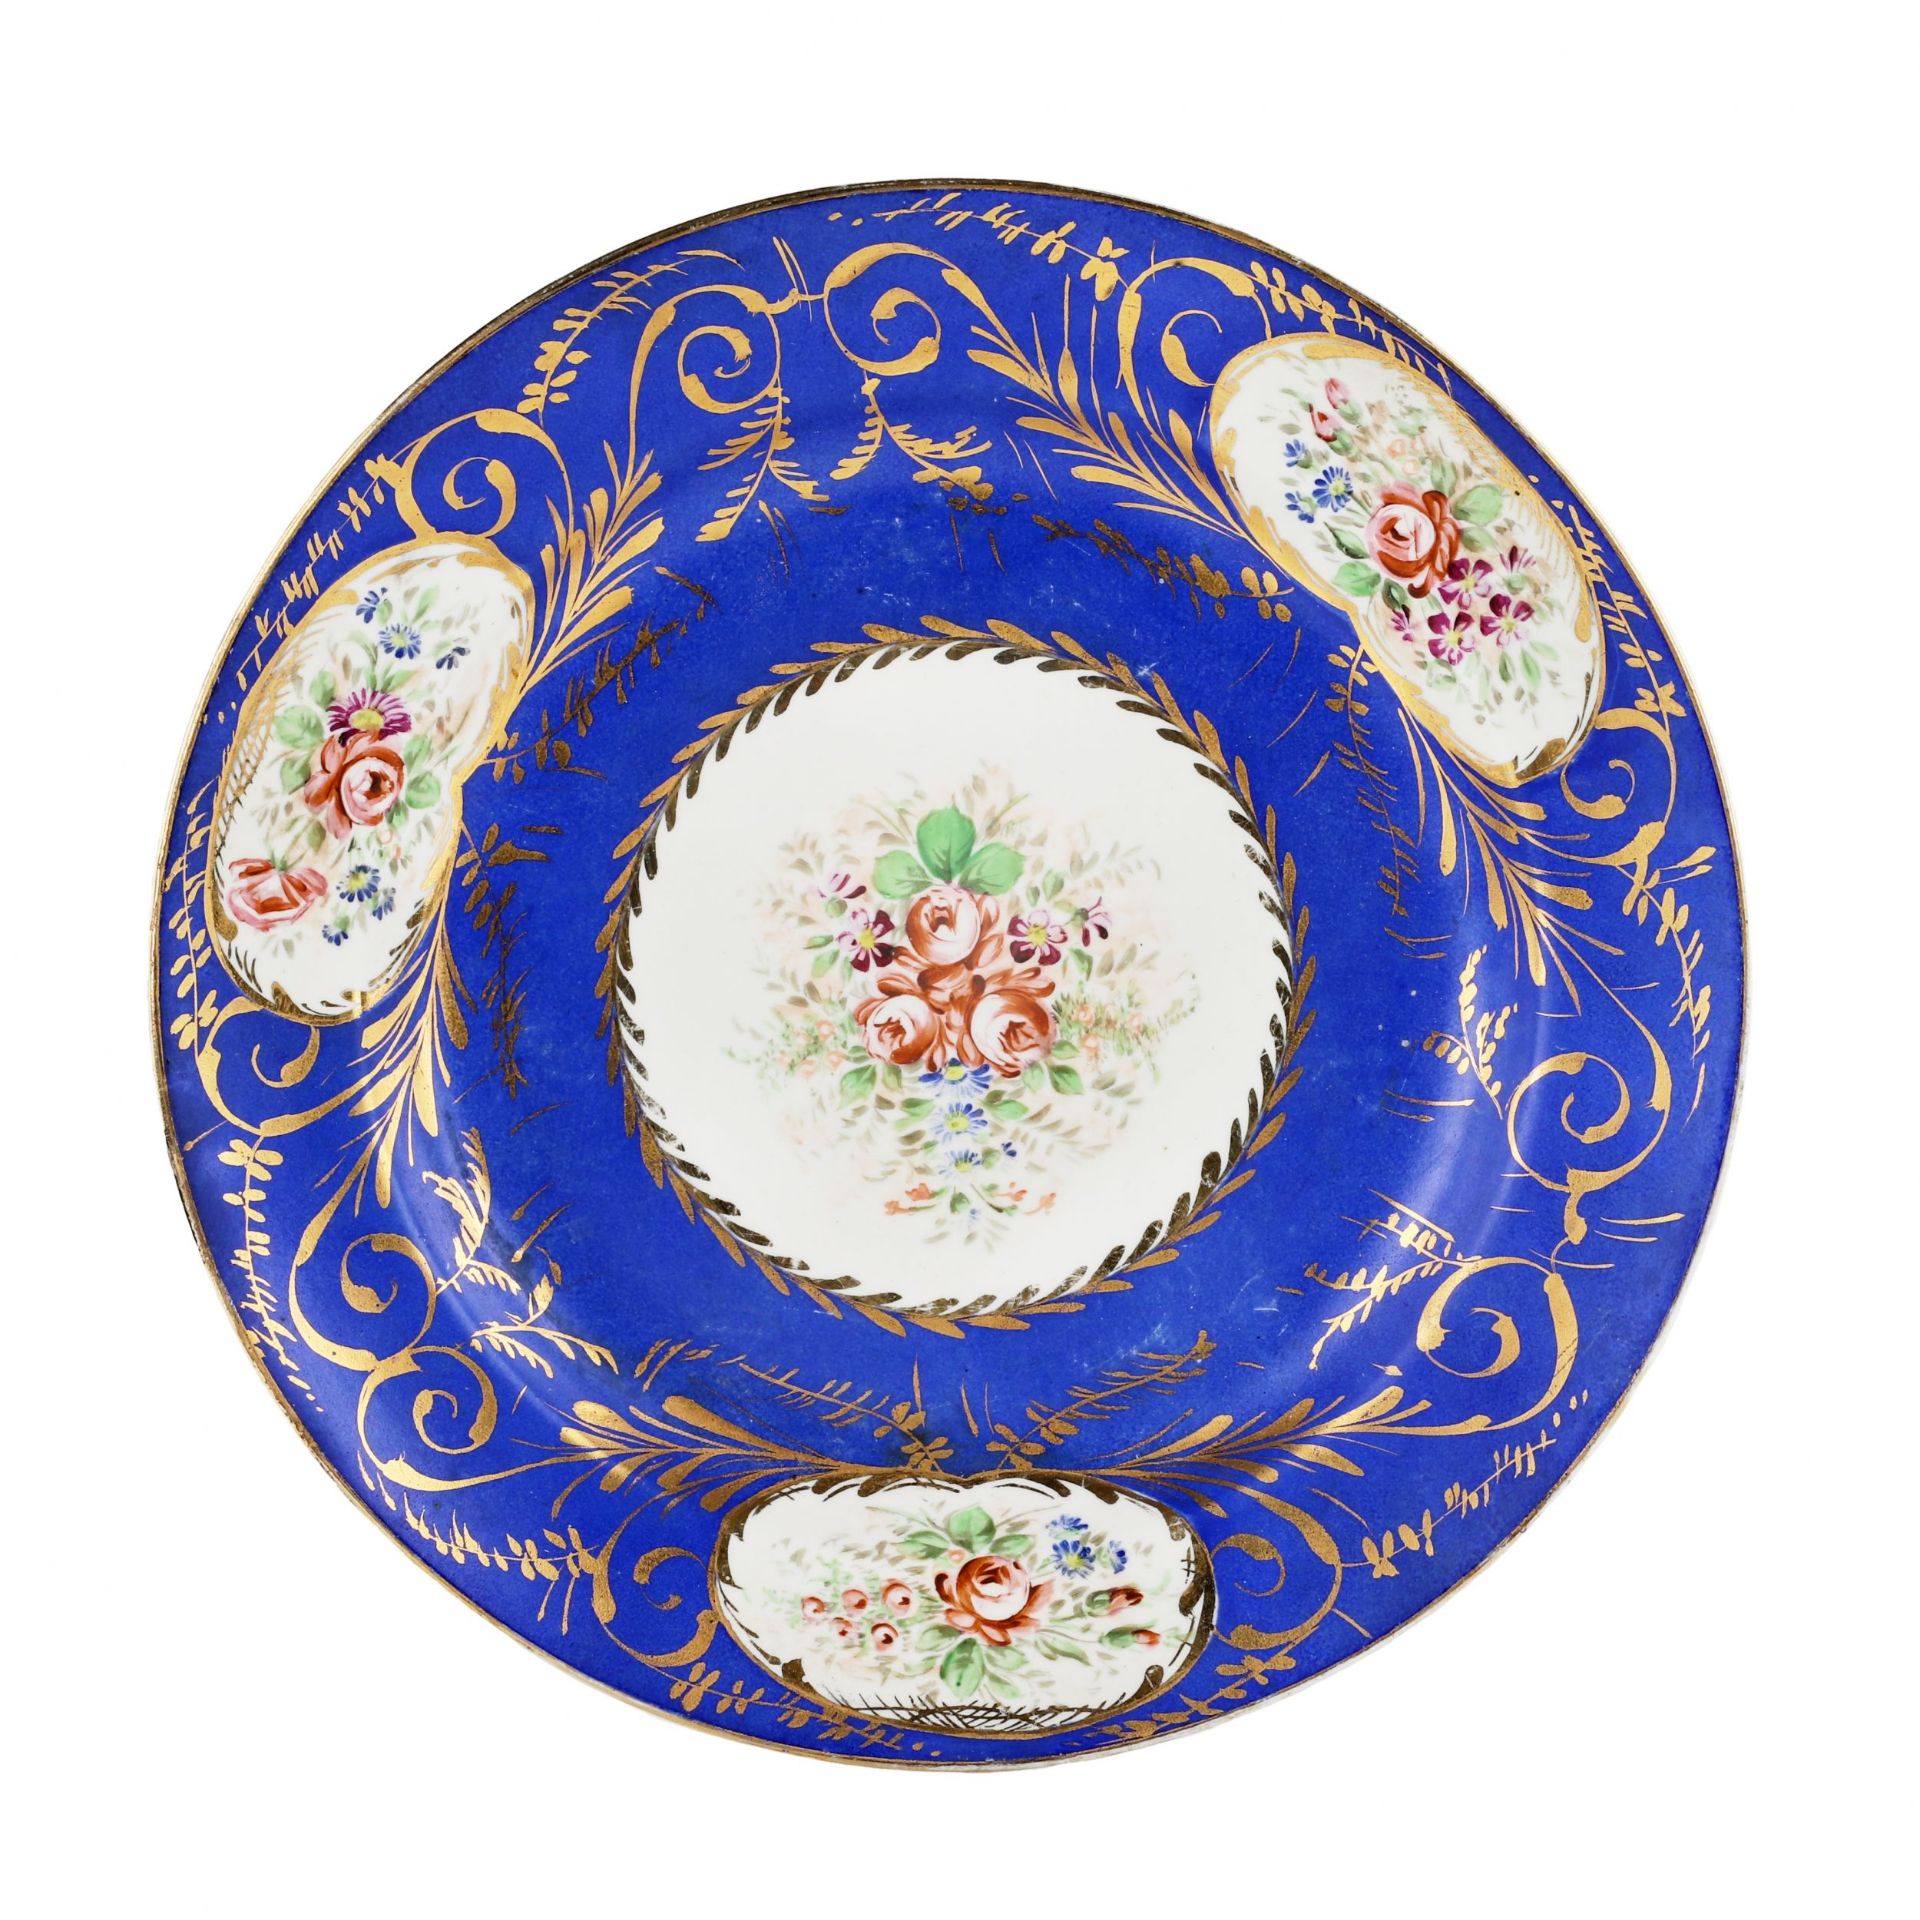 Five dishes and plates from Popov`s factory. 19th century. - Image 3 of 13